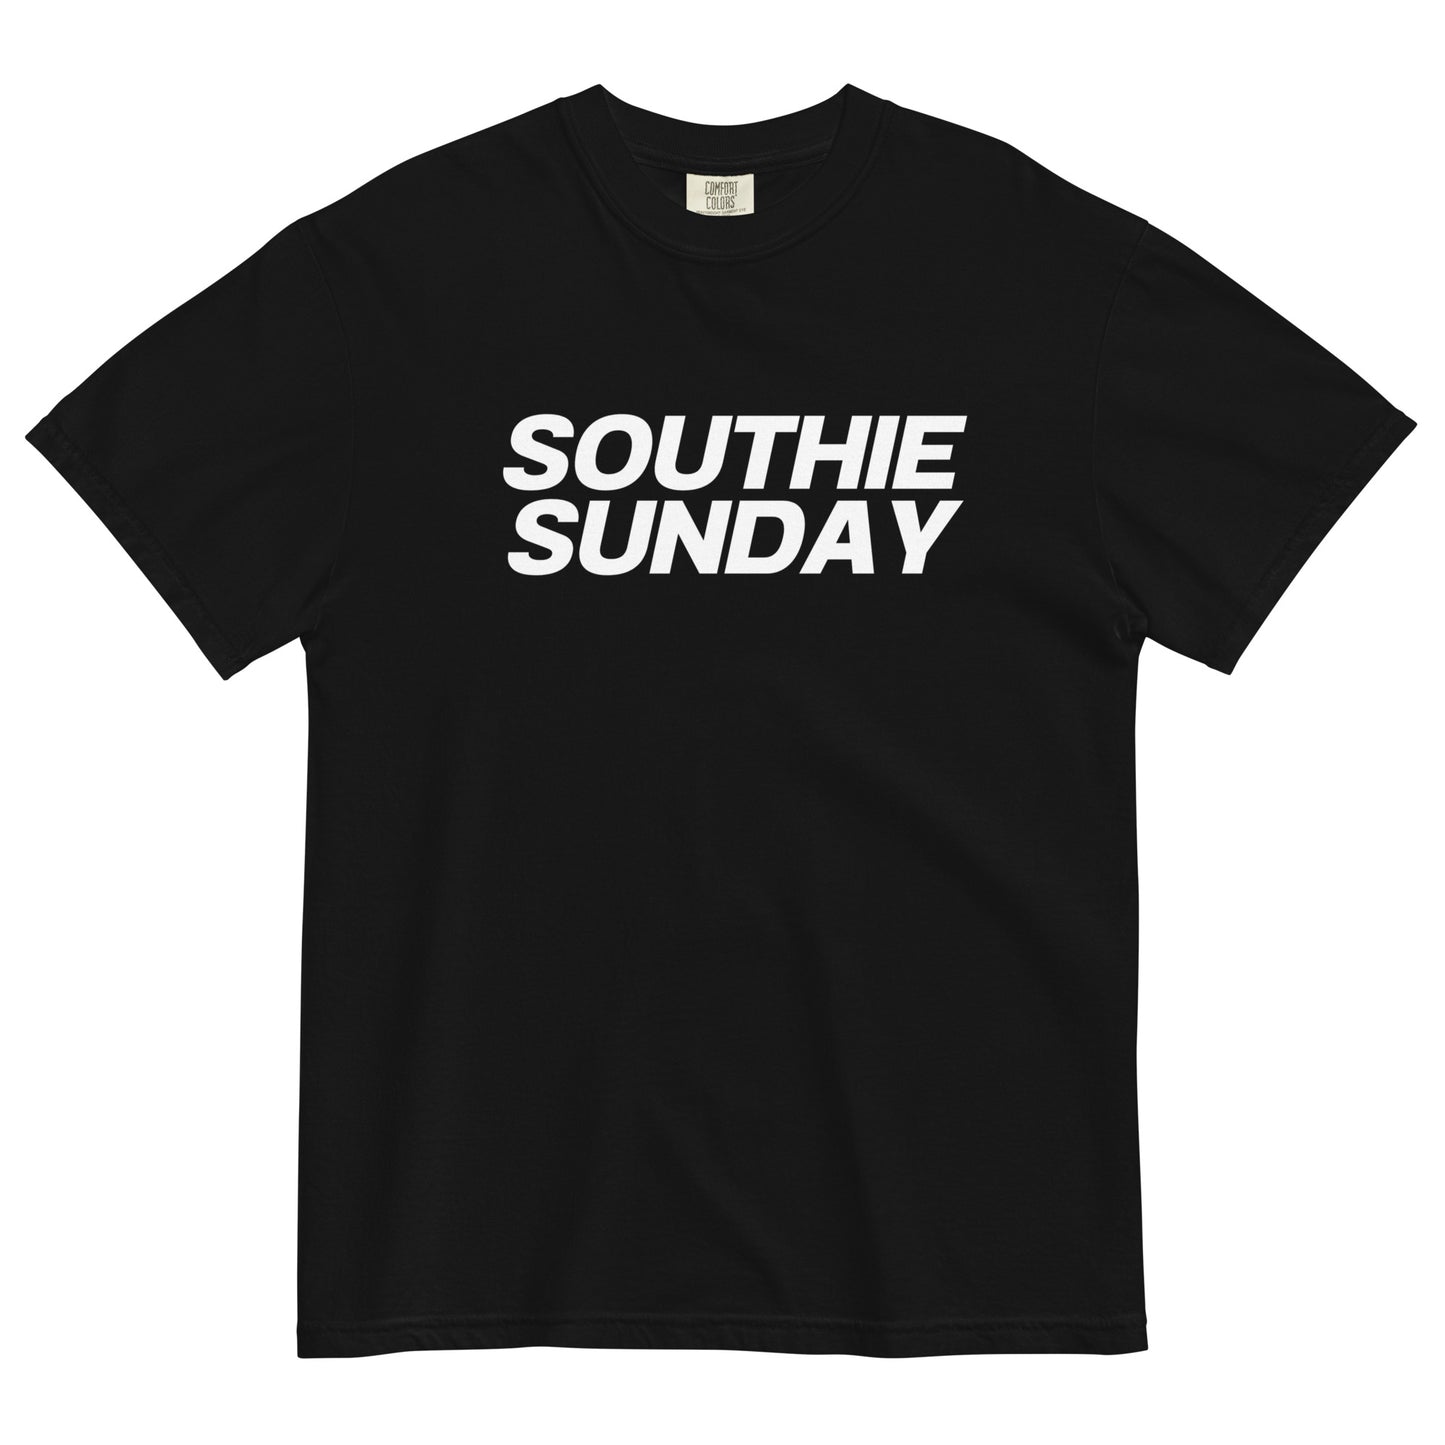 black tshirt that says "southie sunday" in white lettering